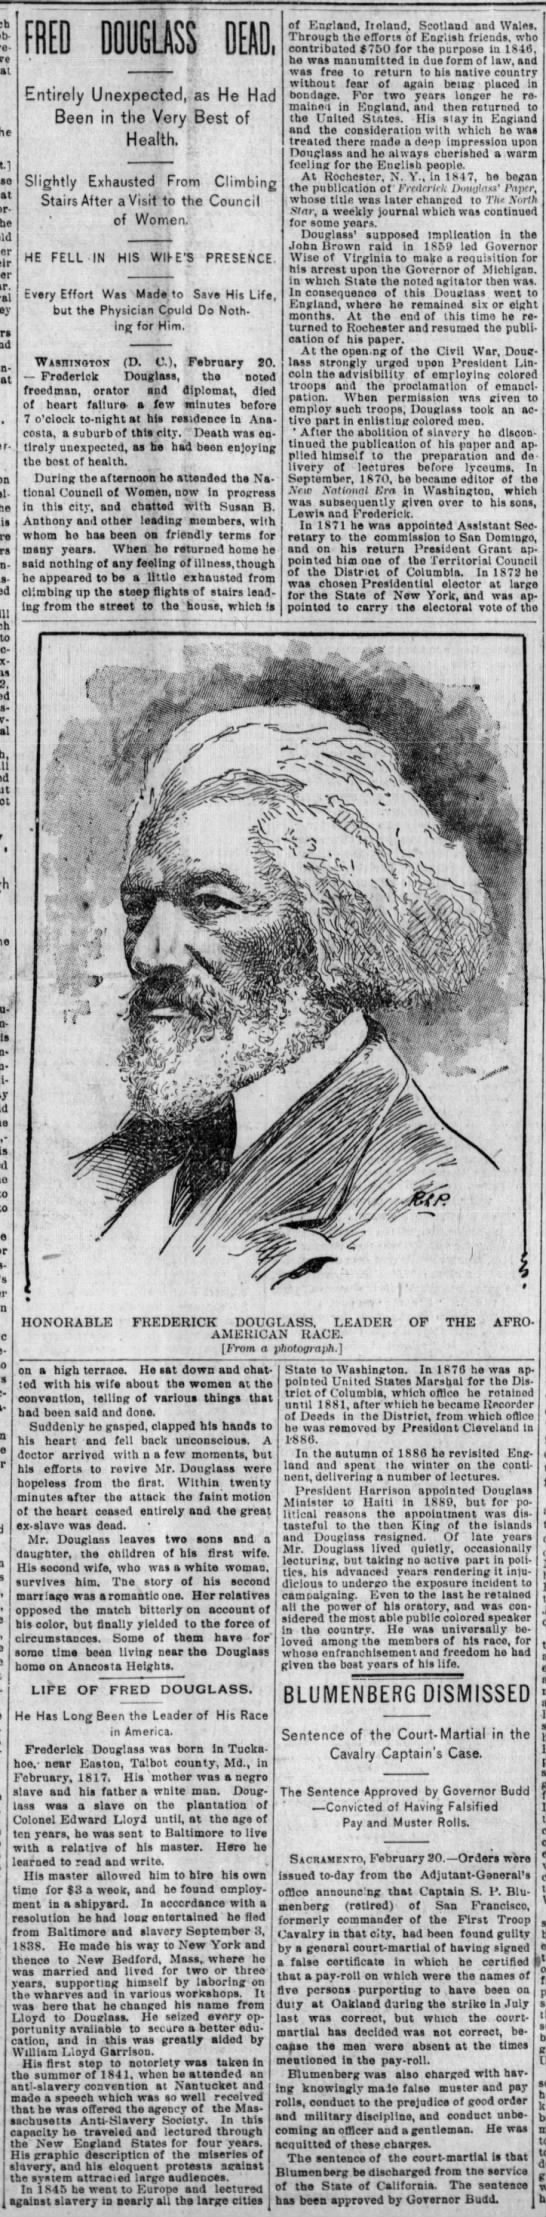 Newspaper obituary (with picture) for Frederick Douglass after his death on February 20, 1895 - 